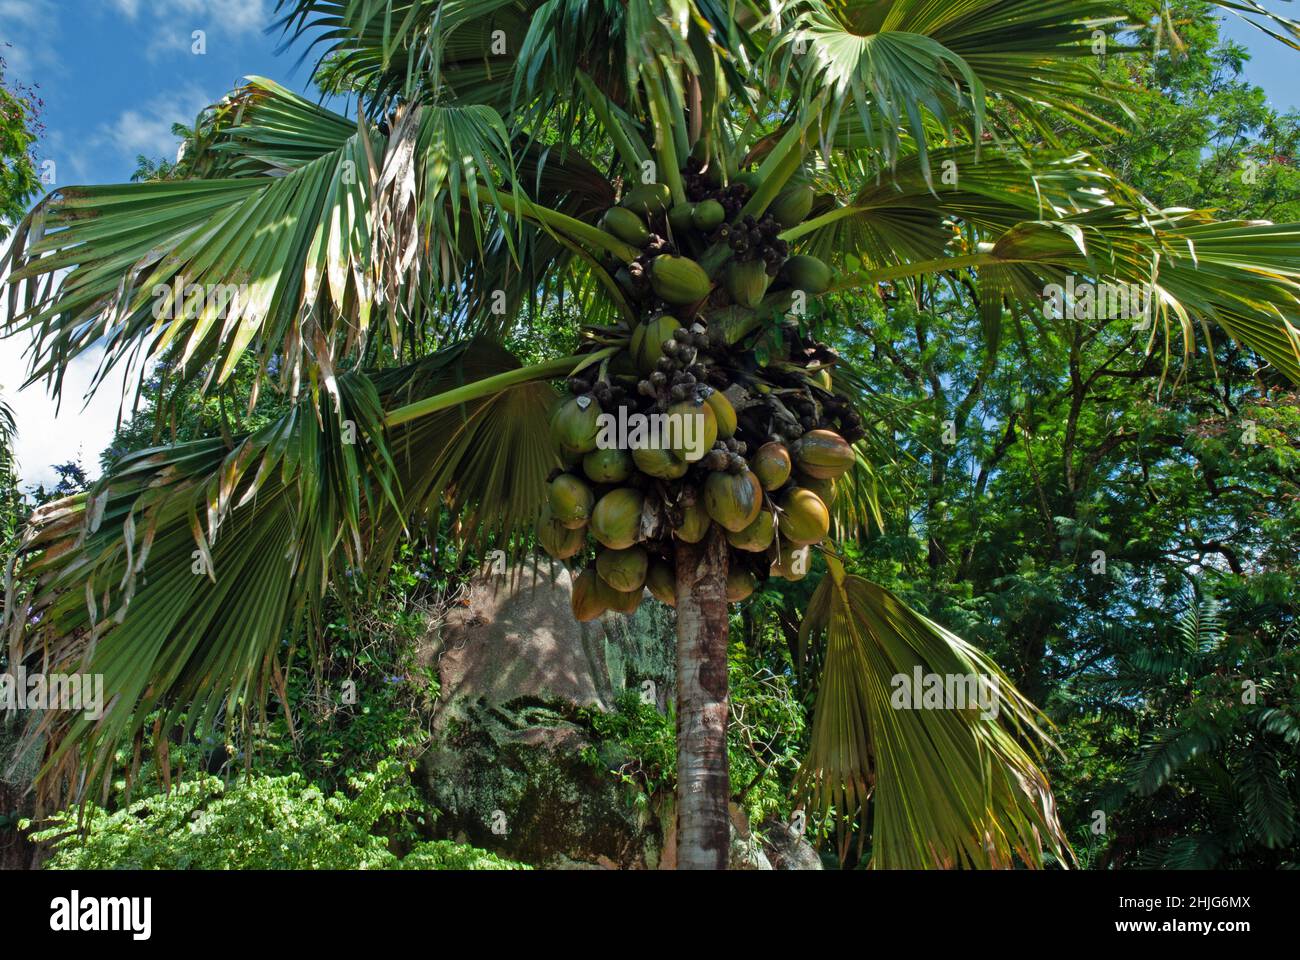 Lodoicea maldivica (coco de mer) is a species of palm endemic to the islands of Praslin and Curieuse in the Seychelles. It occurs in rainforest. Stock Photo